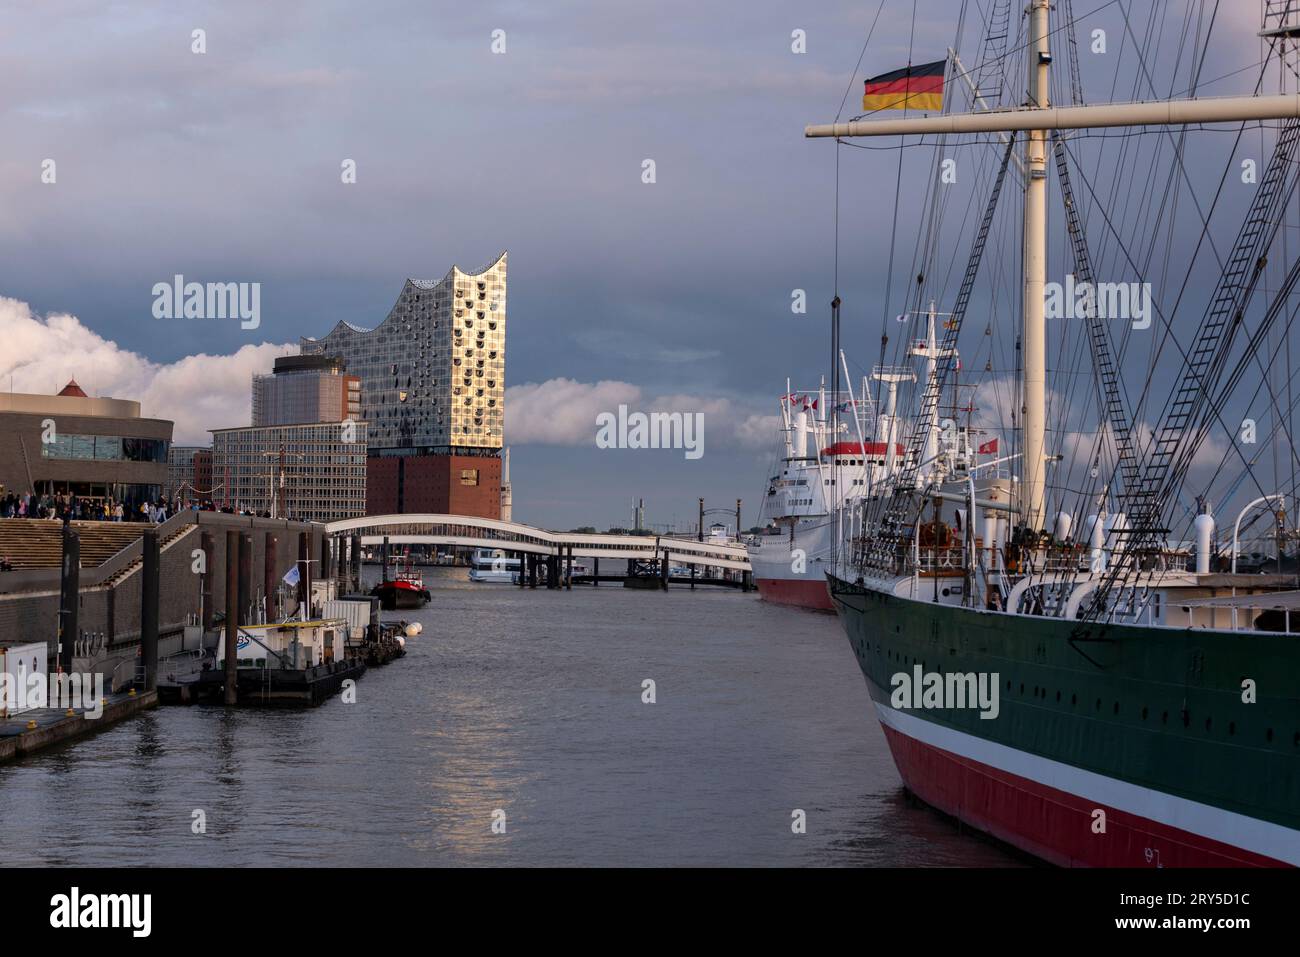 A band of clouds moves along behind the Elbphilharmonie. Stock Photo